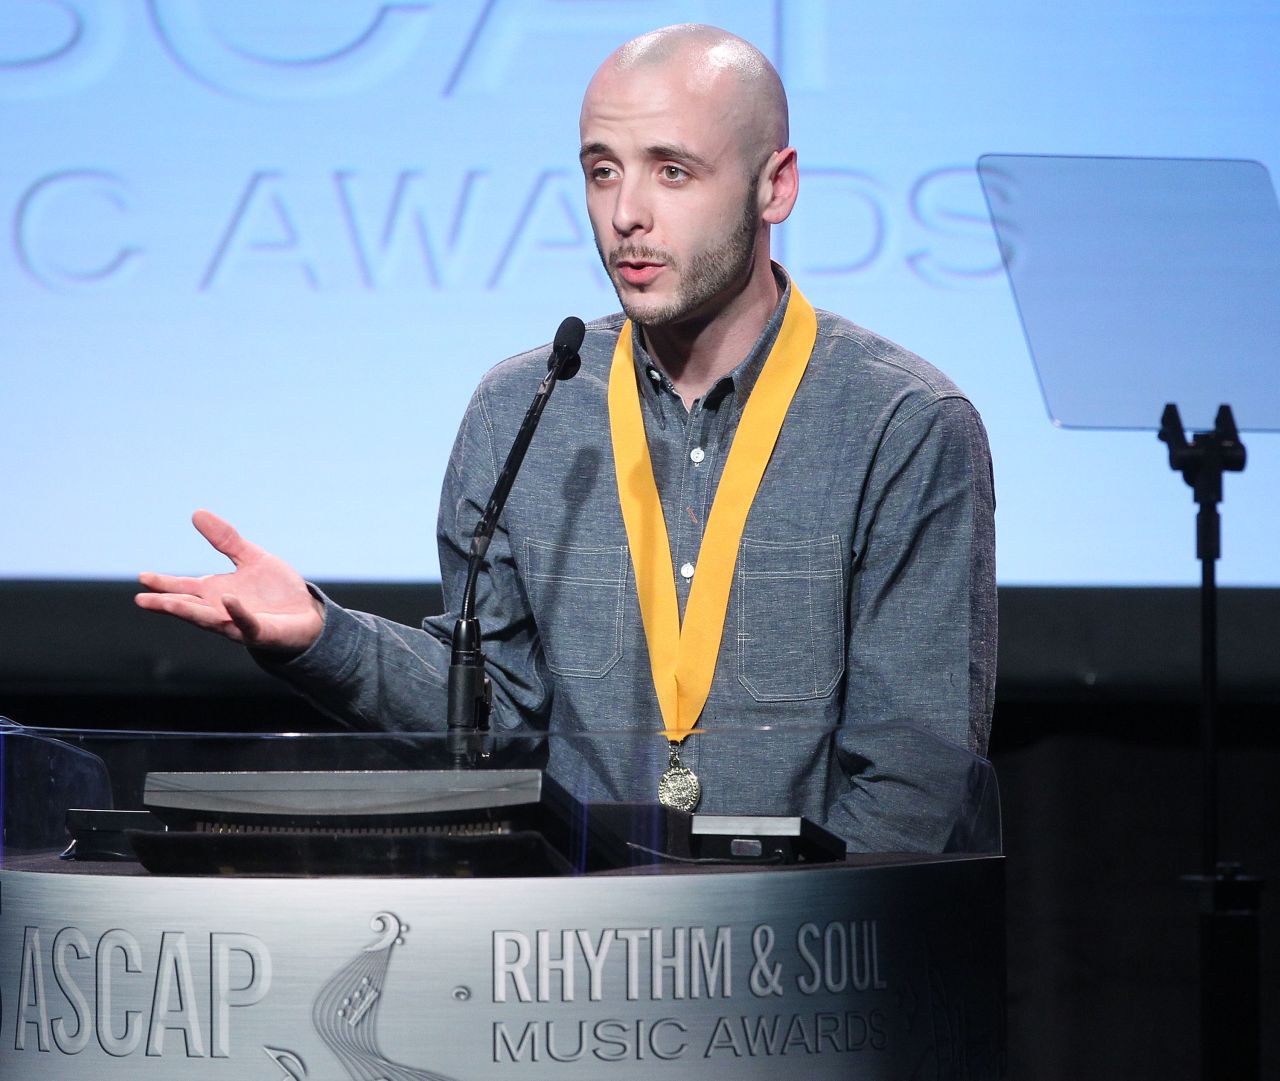 Noah "40" Shebib, a Canadian hip-hop producer who has collaborated with artists such as Drake and Lil Wayne, was diagnosed with multiple sclerosis in his early 20s.